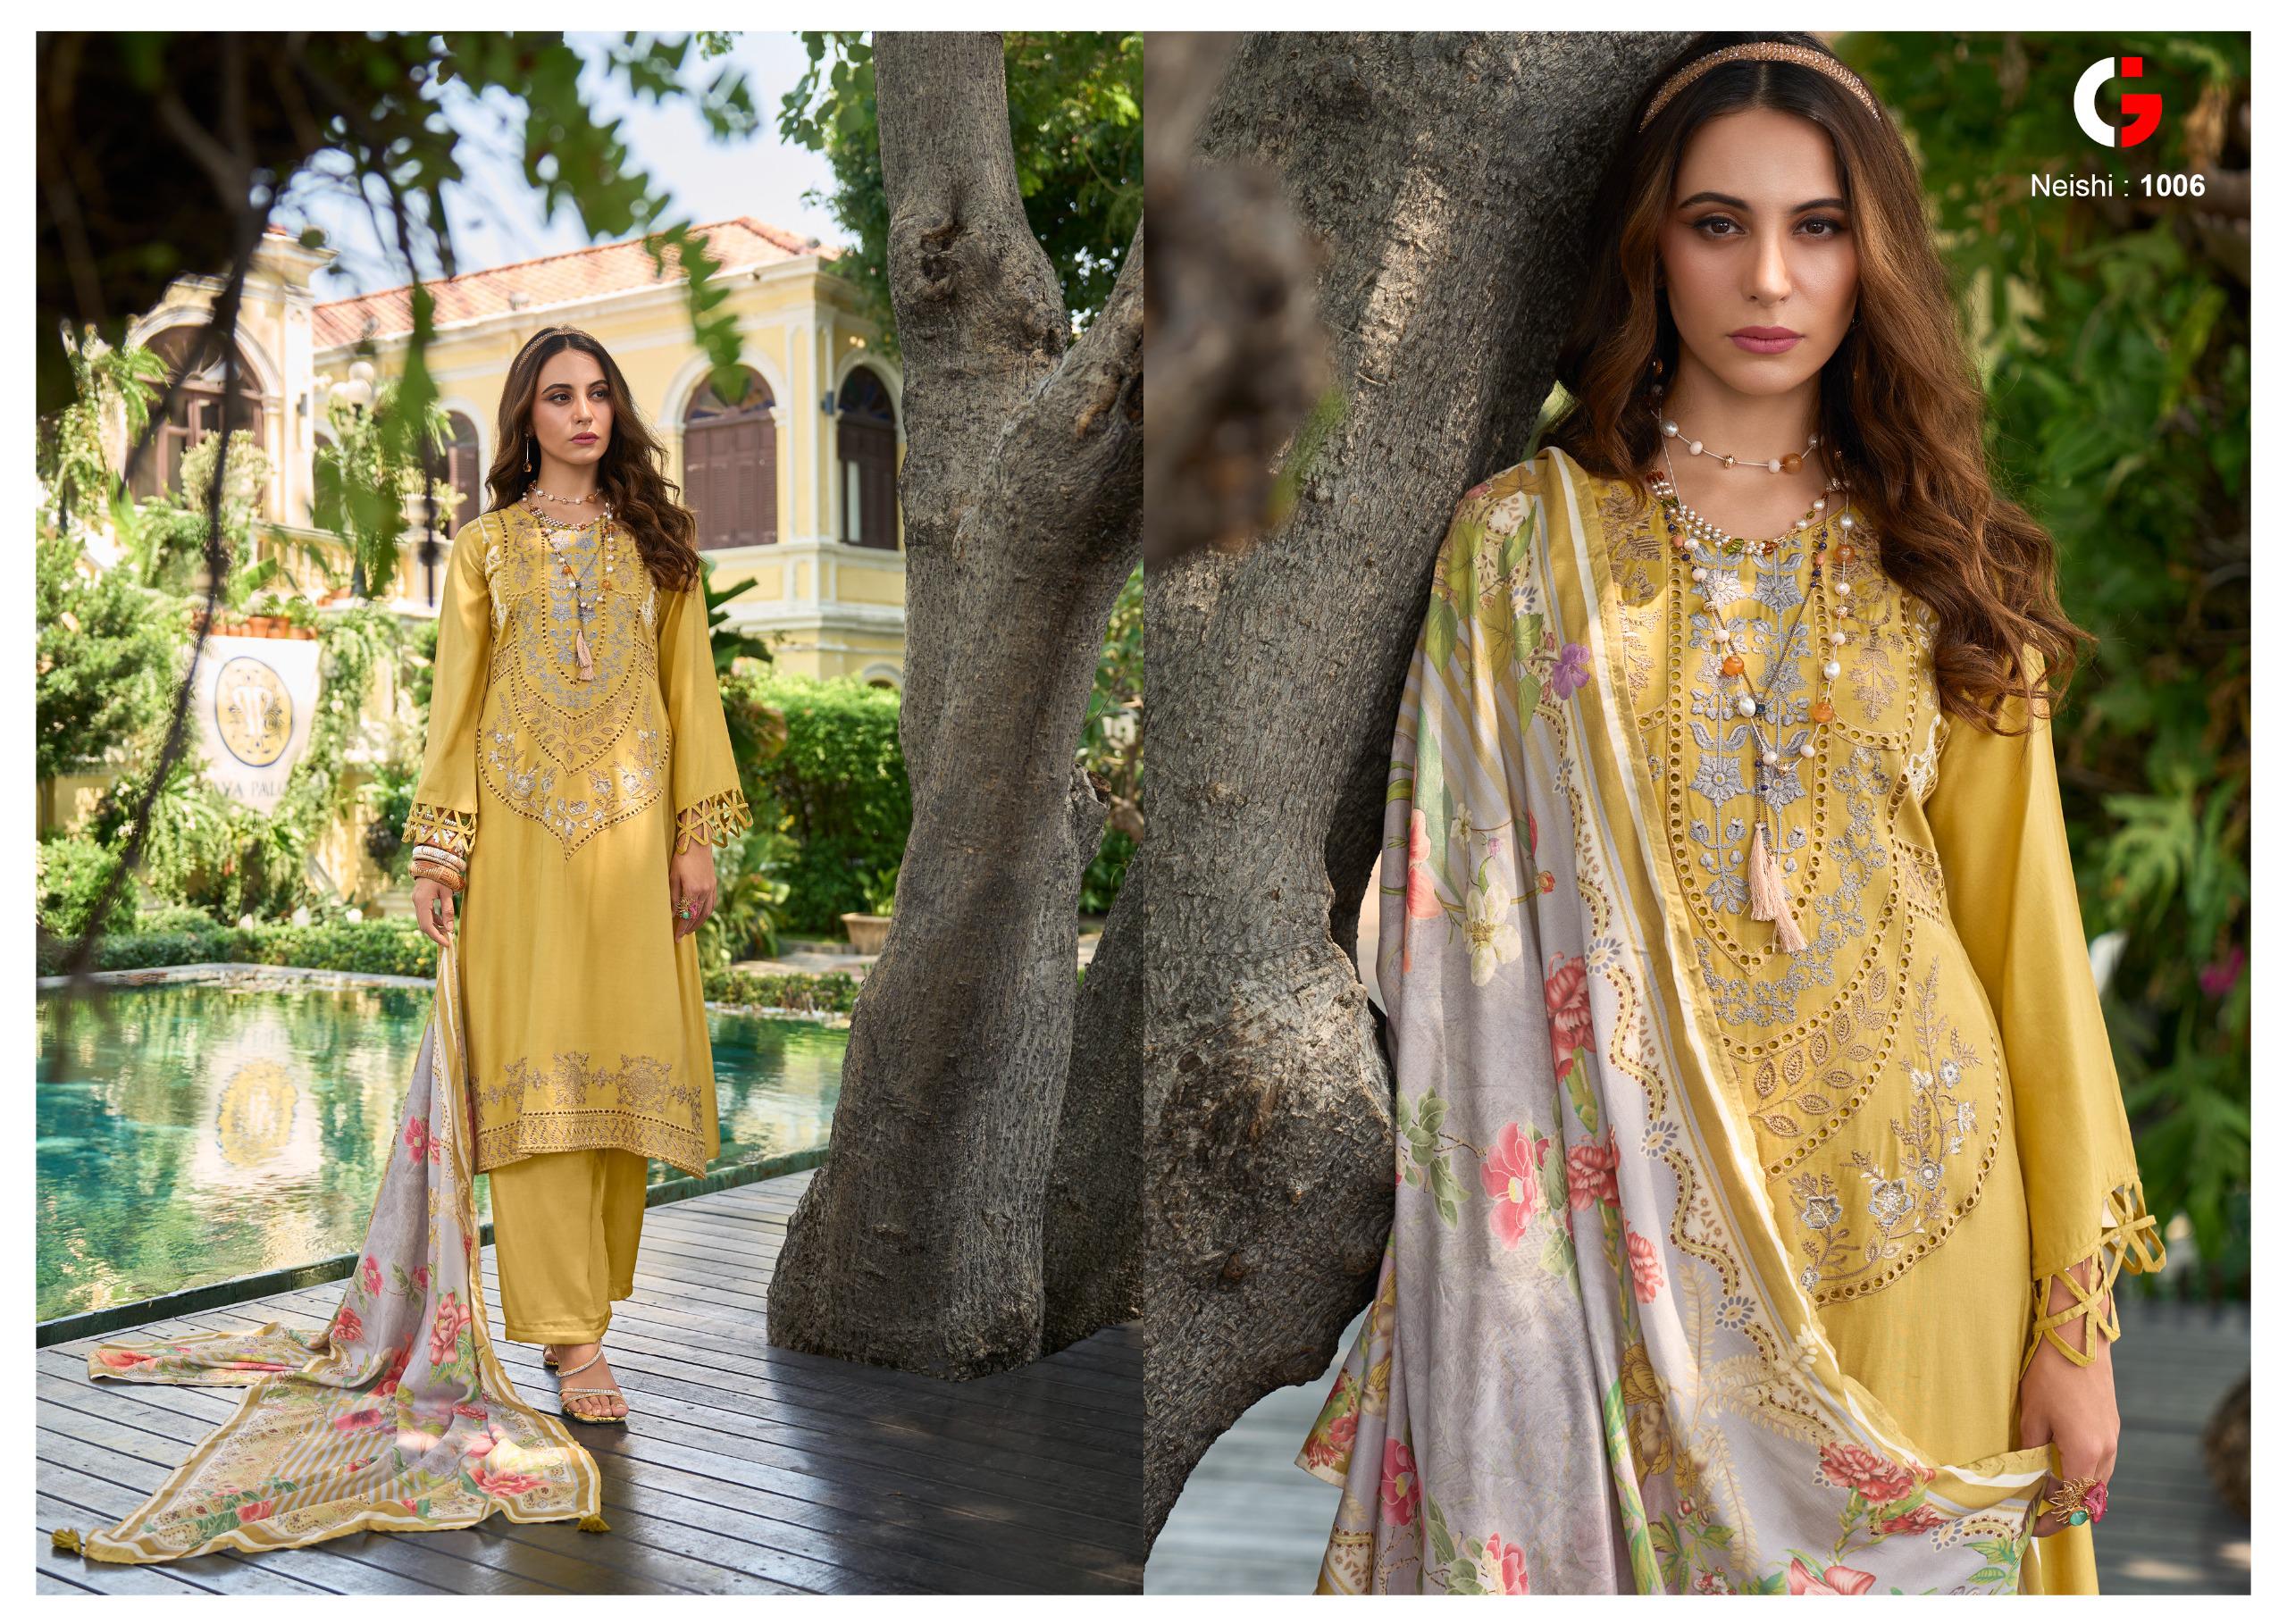 Gull Jee Neishi Muslin With Embroidery Work Designer Partywear Salwar Kameez At Wholesale Rate